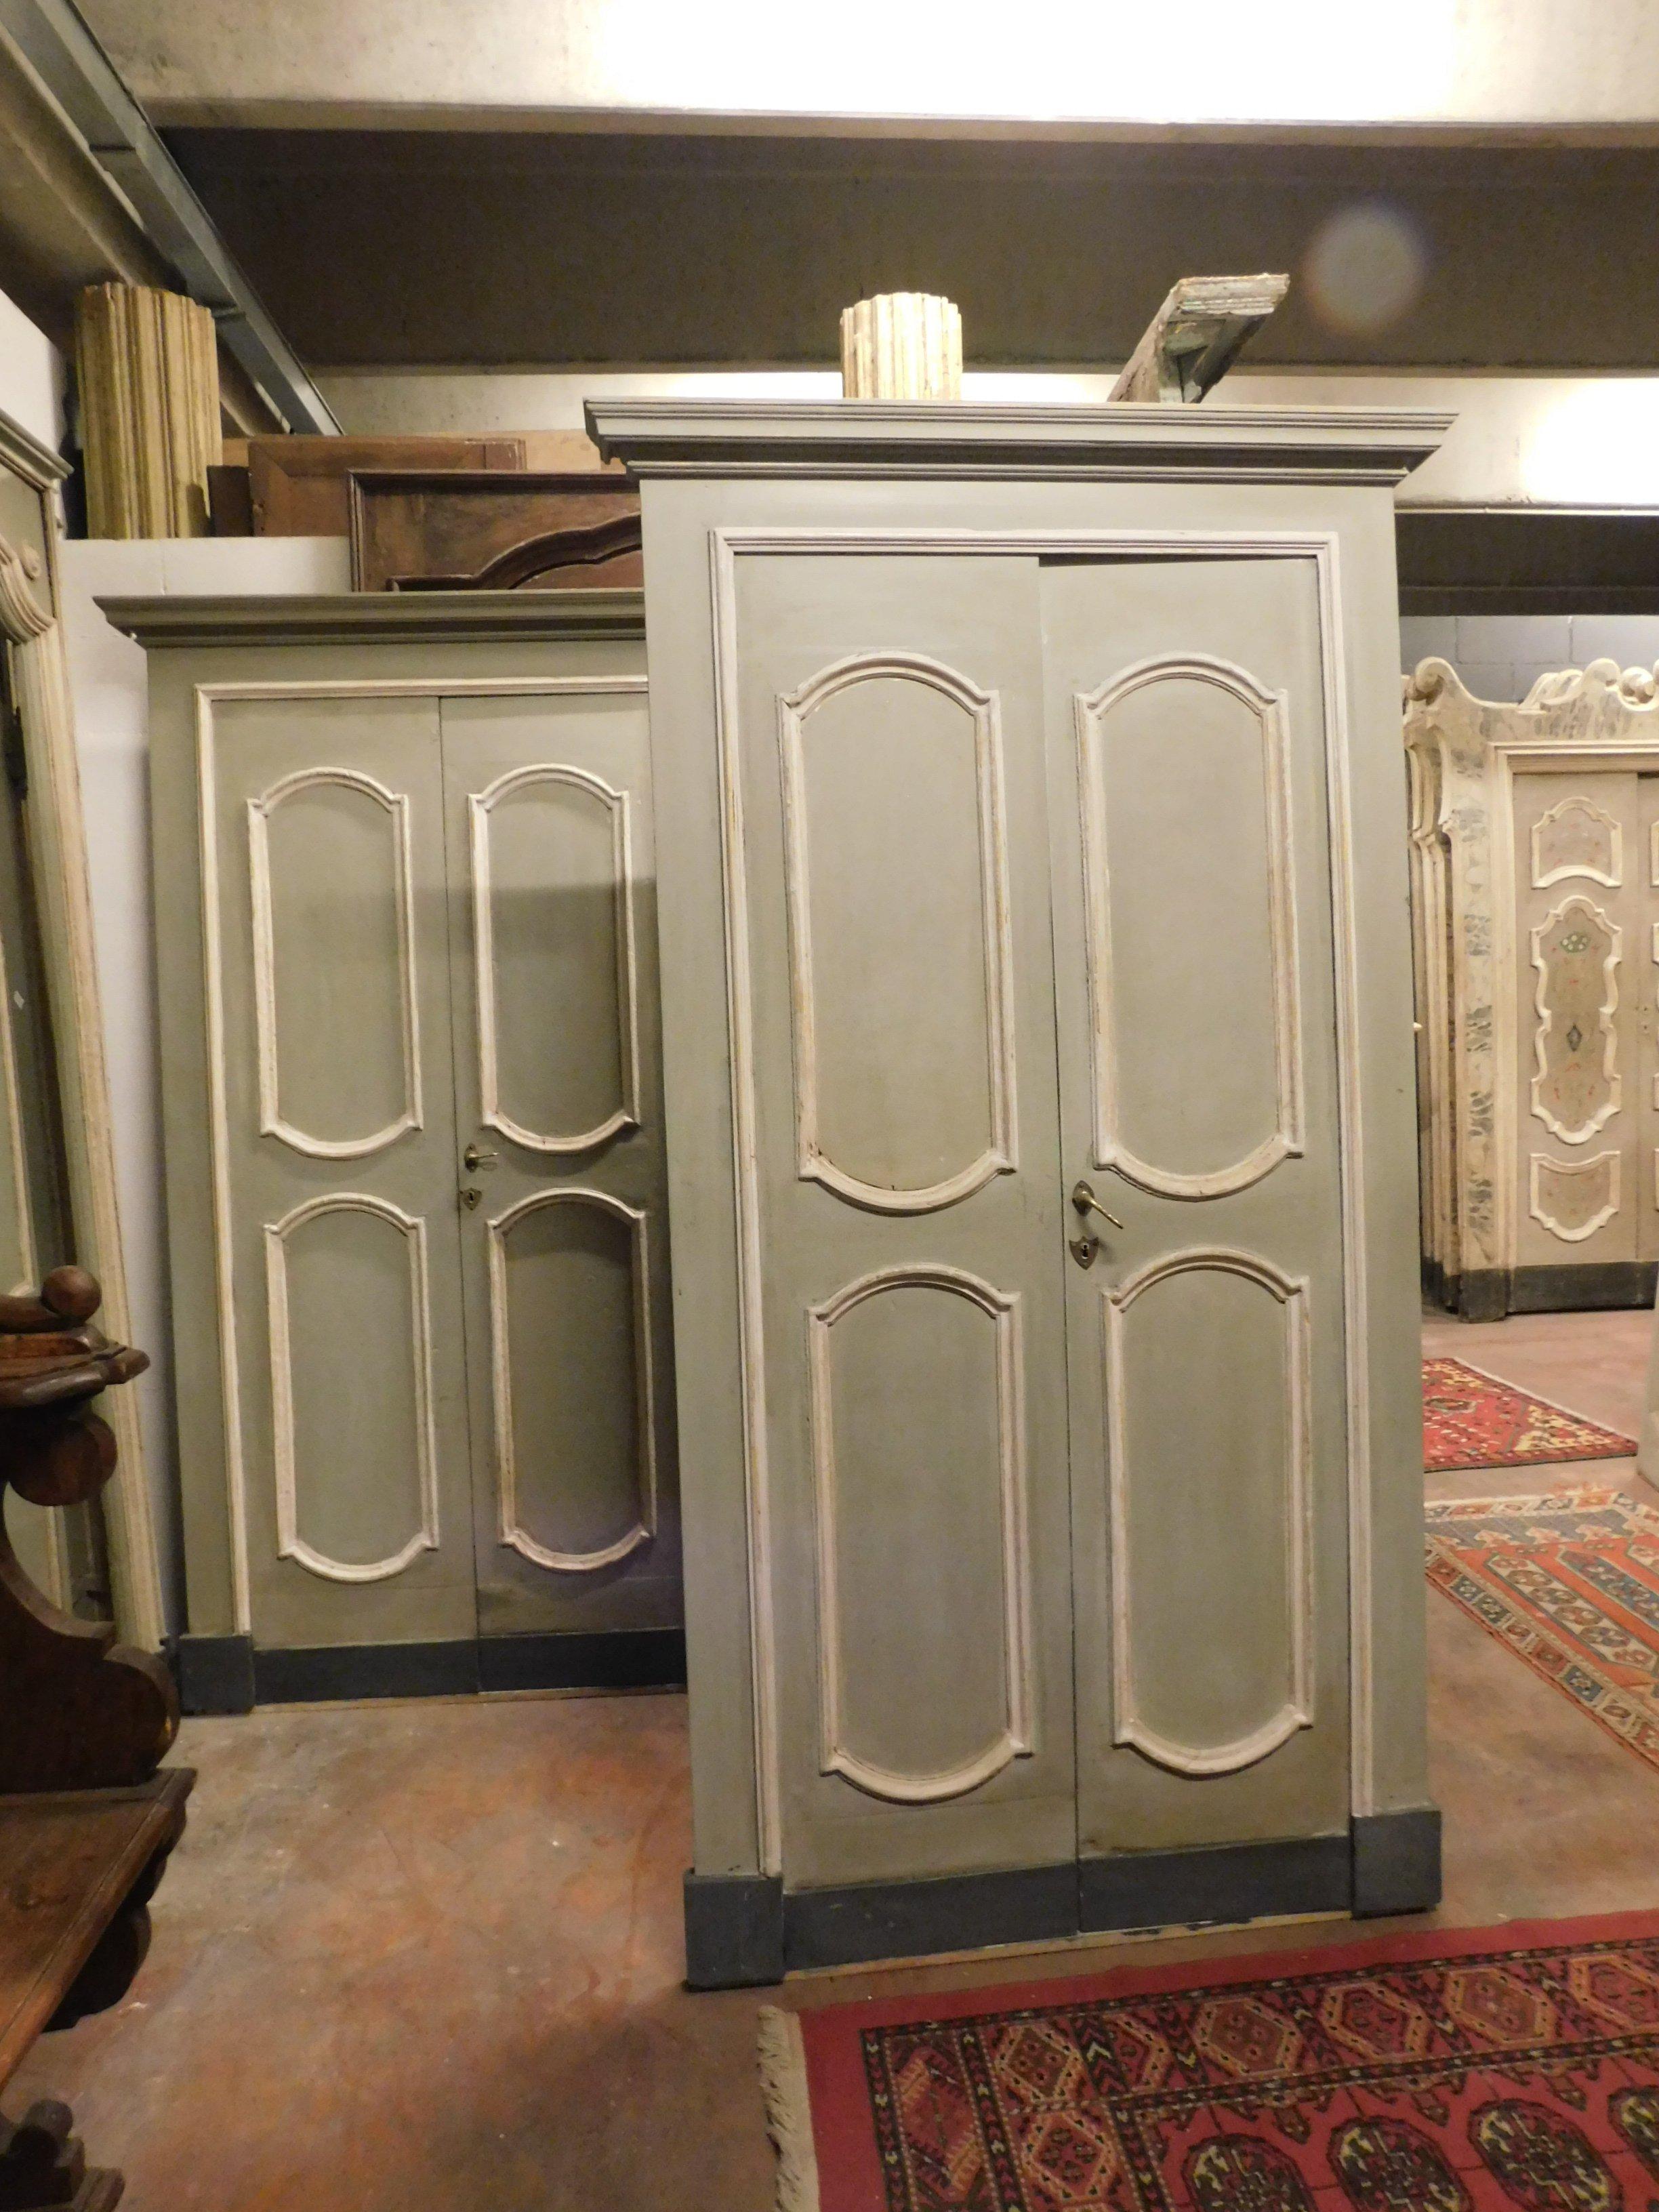 Antique pair of double wing doors, lacquered with original frame, green colors and beautiful deep white molure, both built in the 18th century for a palace in Italy.
Beautiful in pairs, suitable for living room or neighboring rooms, since they are